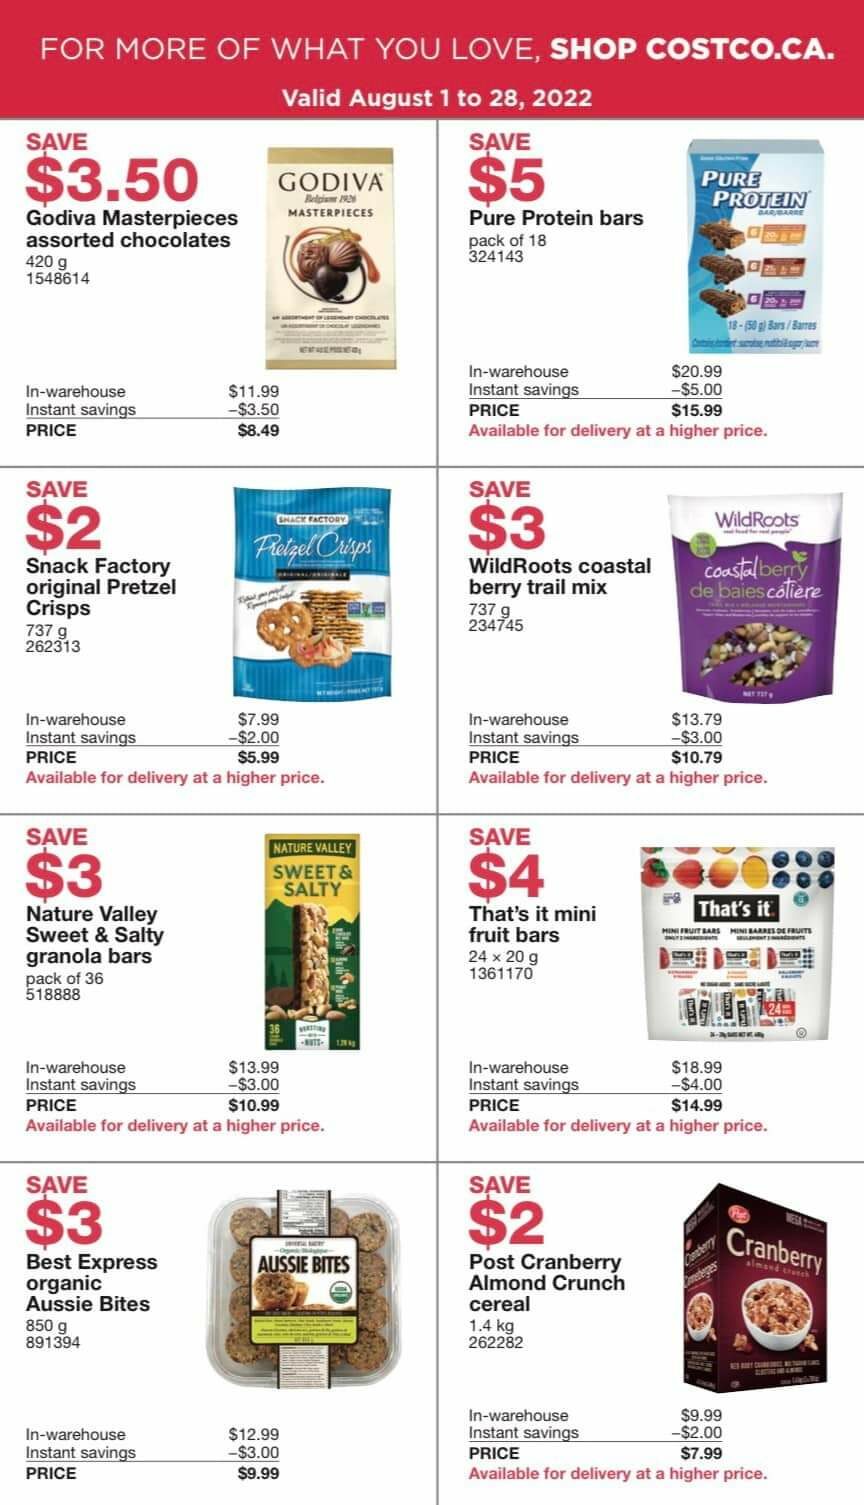 Costco Canada Weekly Instant Handouts Coupons/Flyers For Western: British  Columbia, Alberta, Saskatchewan & Manitoba, From February 22 To 28 -  Canadian Freebies, Coupons, Deals, Bargains, Flyers, Contests Canada  Canadian Freebies, Coupons, Deals